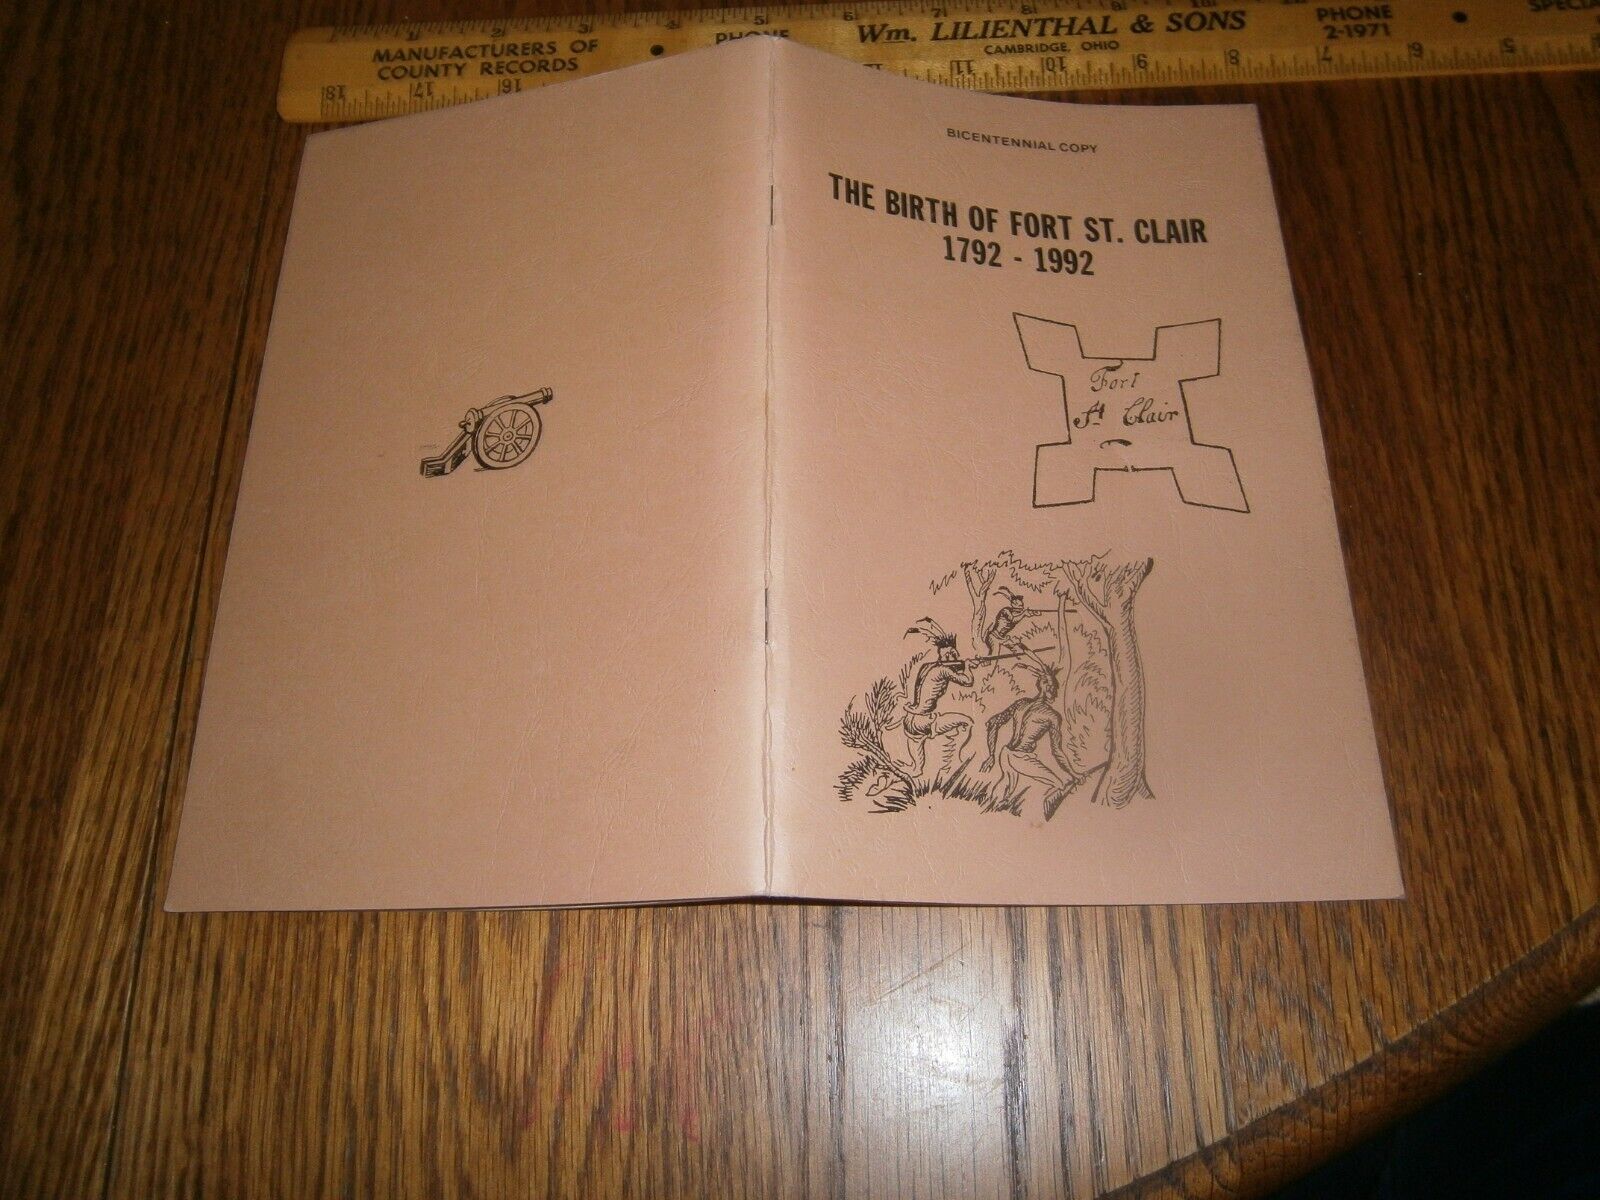 1992 BIRTH OF FORT ST. CLAIR EATON OHIO PREBLE COUNTY BICENTENNIAL COPY BOOKLET